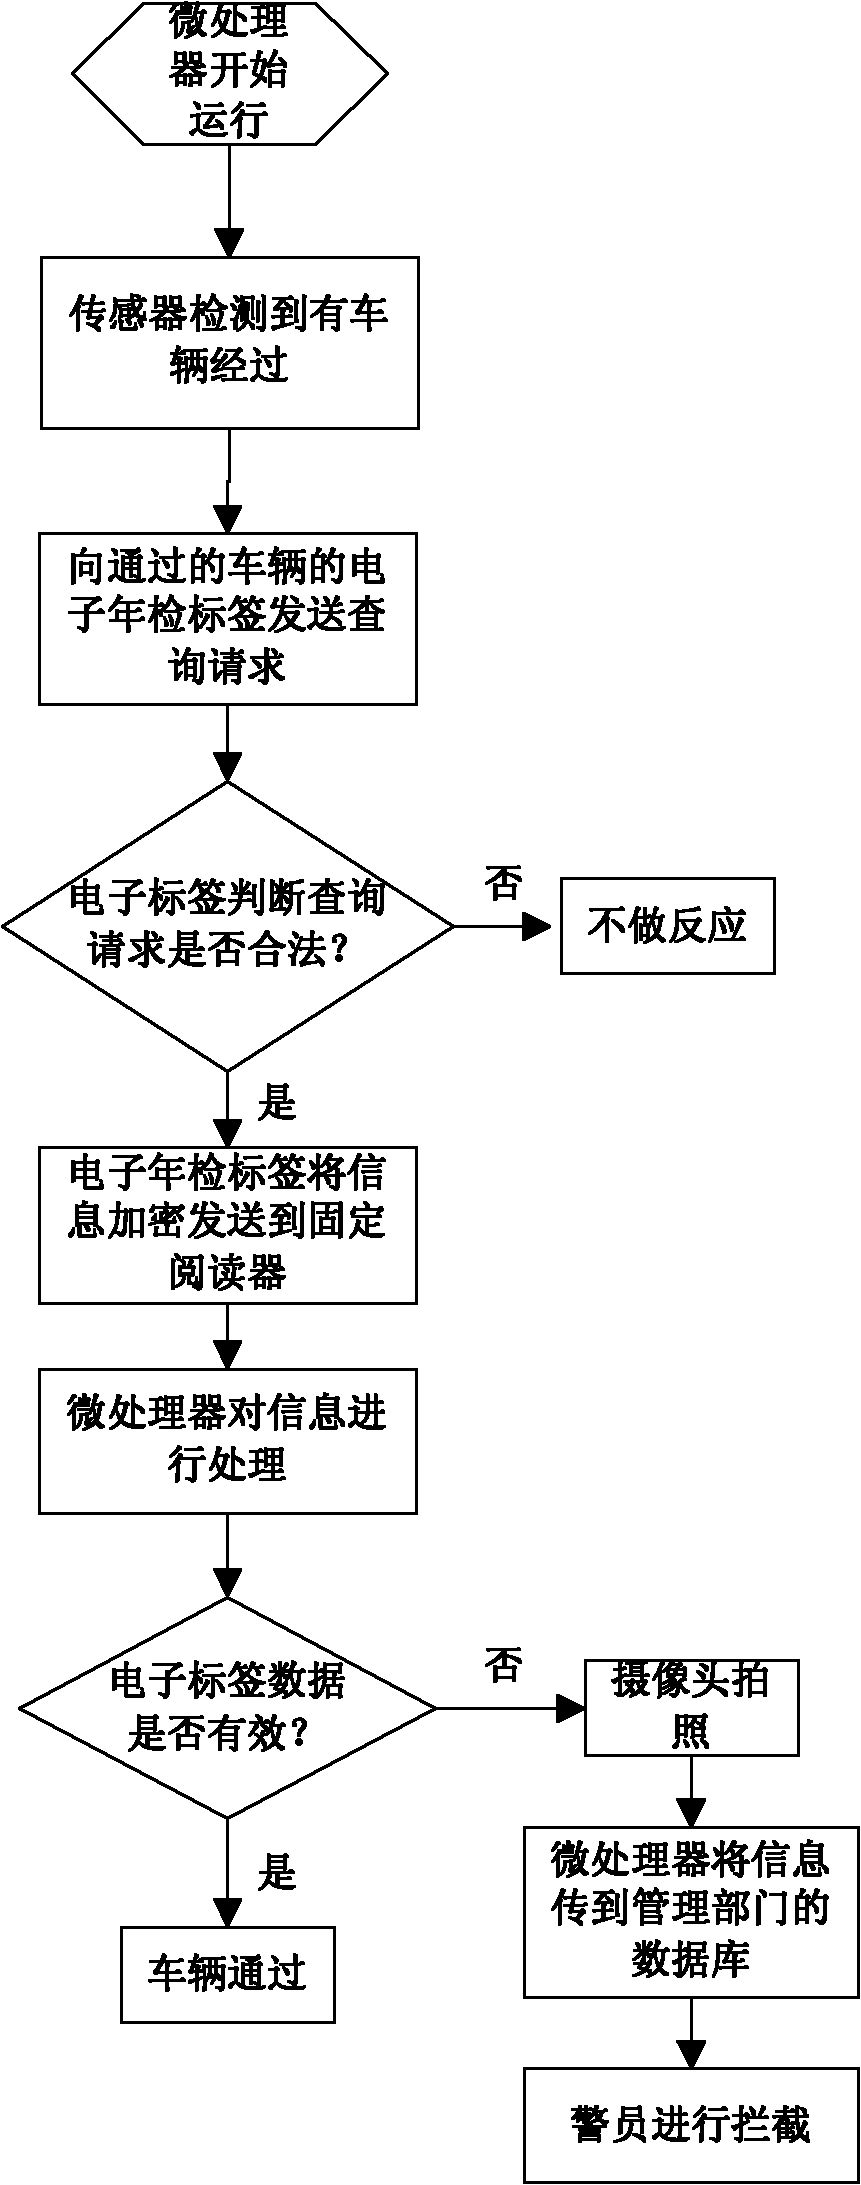 Vehicle checking method based on thin paper electronic AS (annual survey) tag